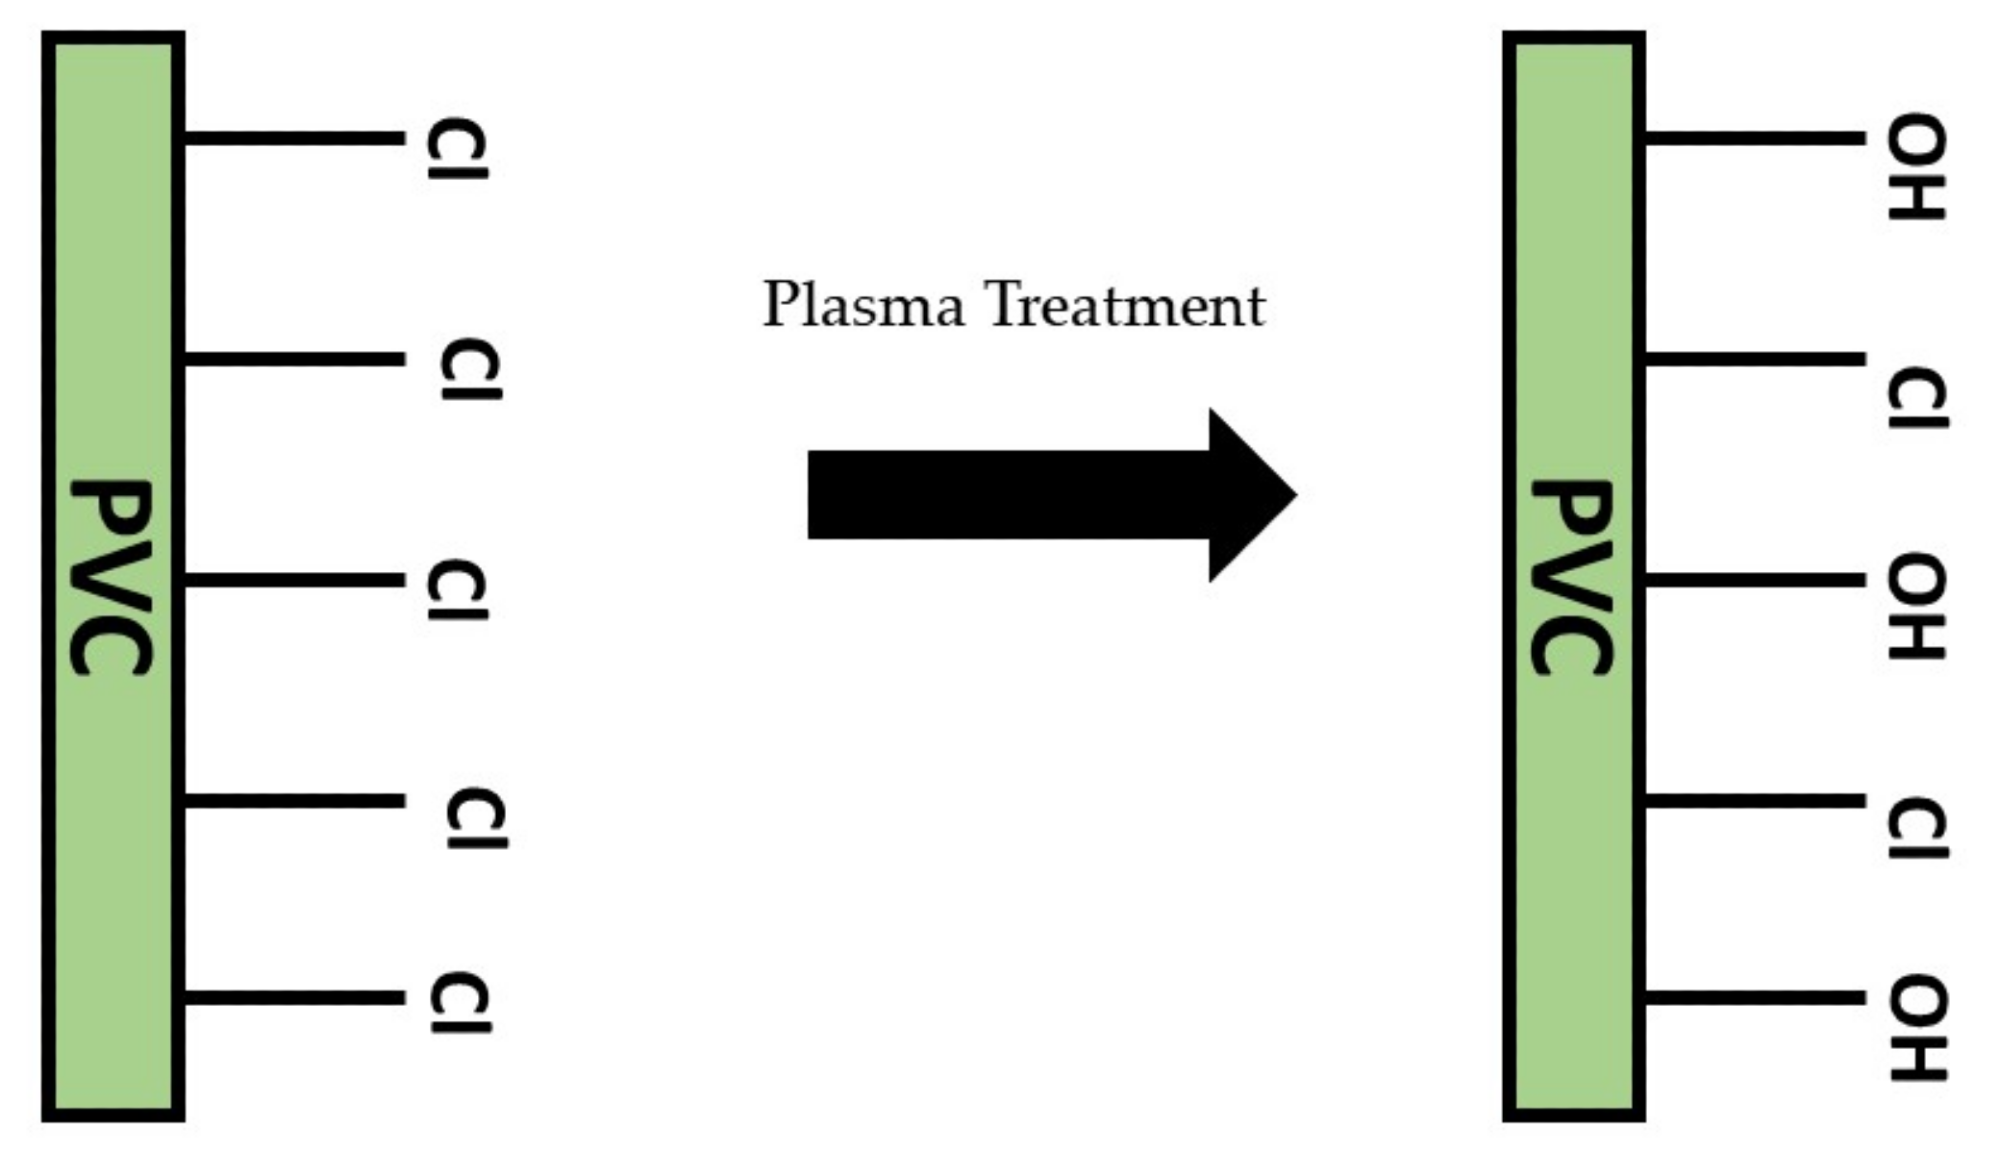 Plasma surface treatment changing surface morphology and functional group formation on the treated surface.